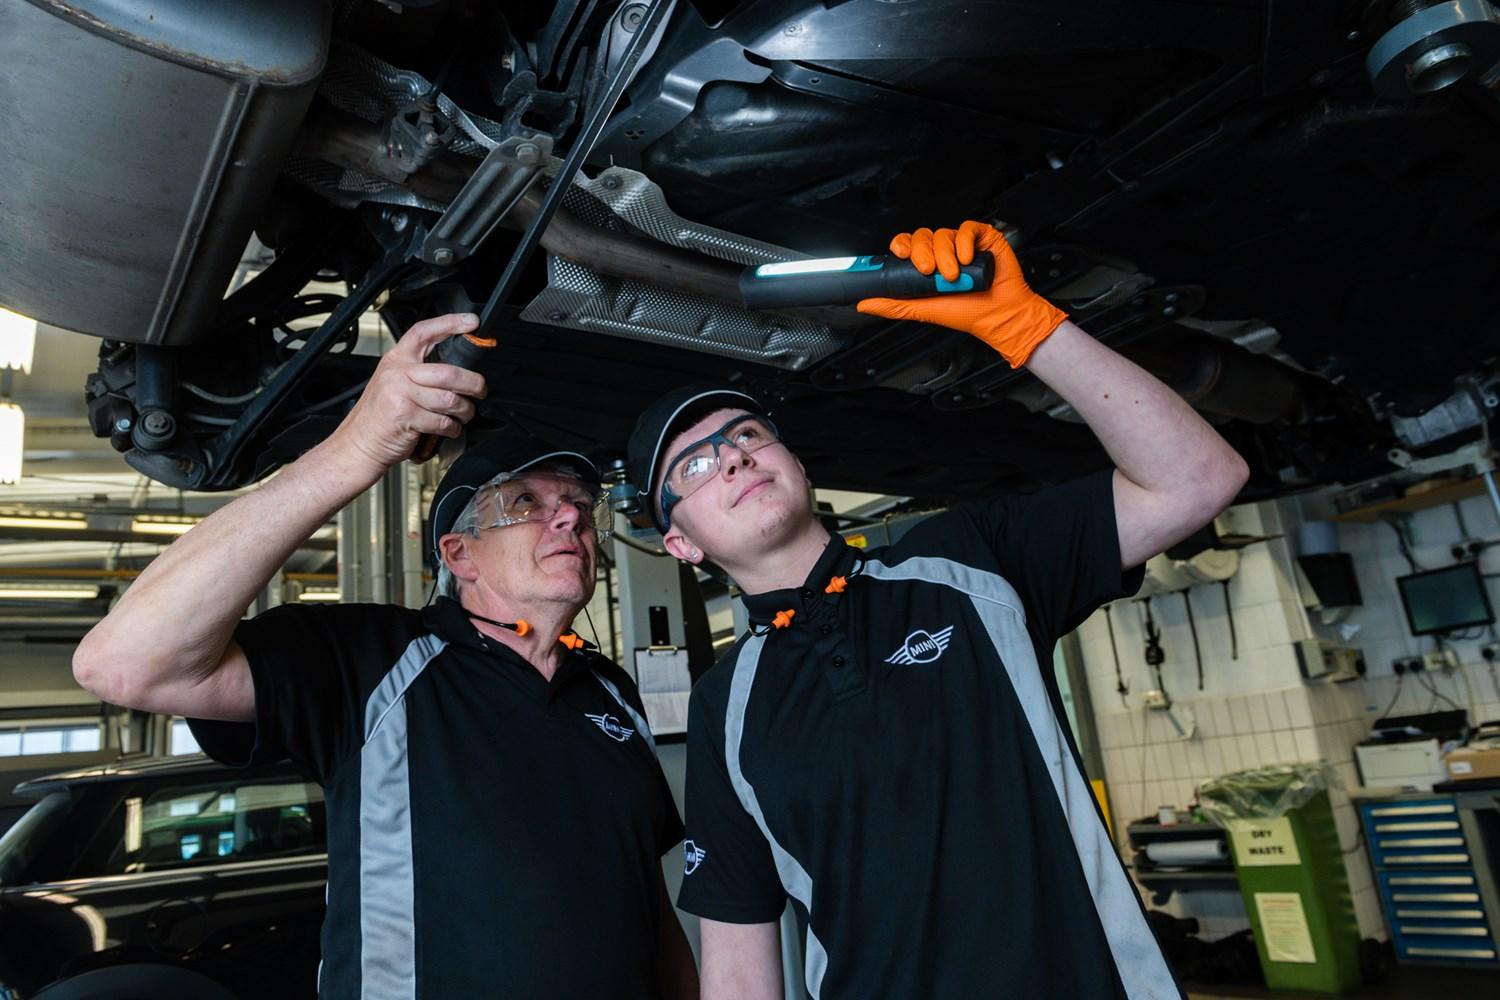 Two MINI Repair Specialists inspect the undercarriage of a MINI vehicle during routine maintenance at the MINI Repair Centre at Bavarian MINI